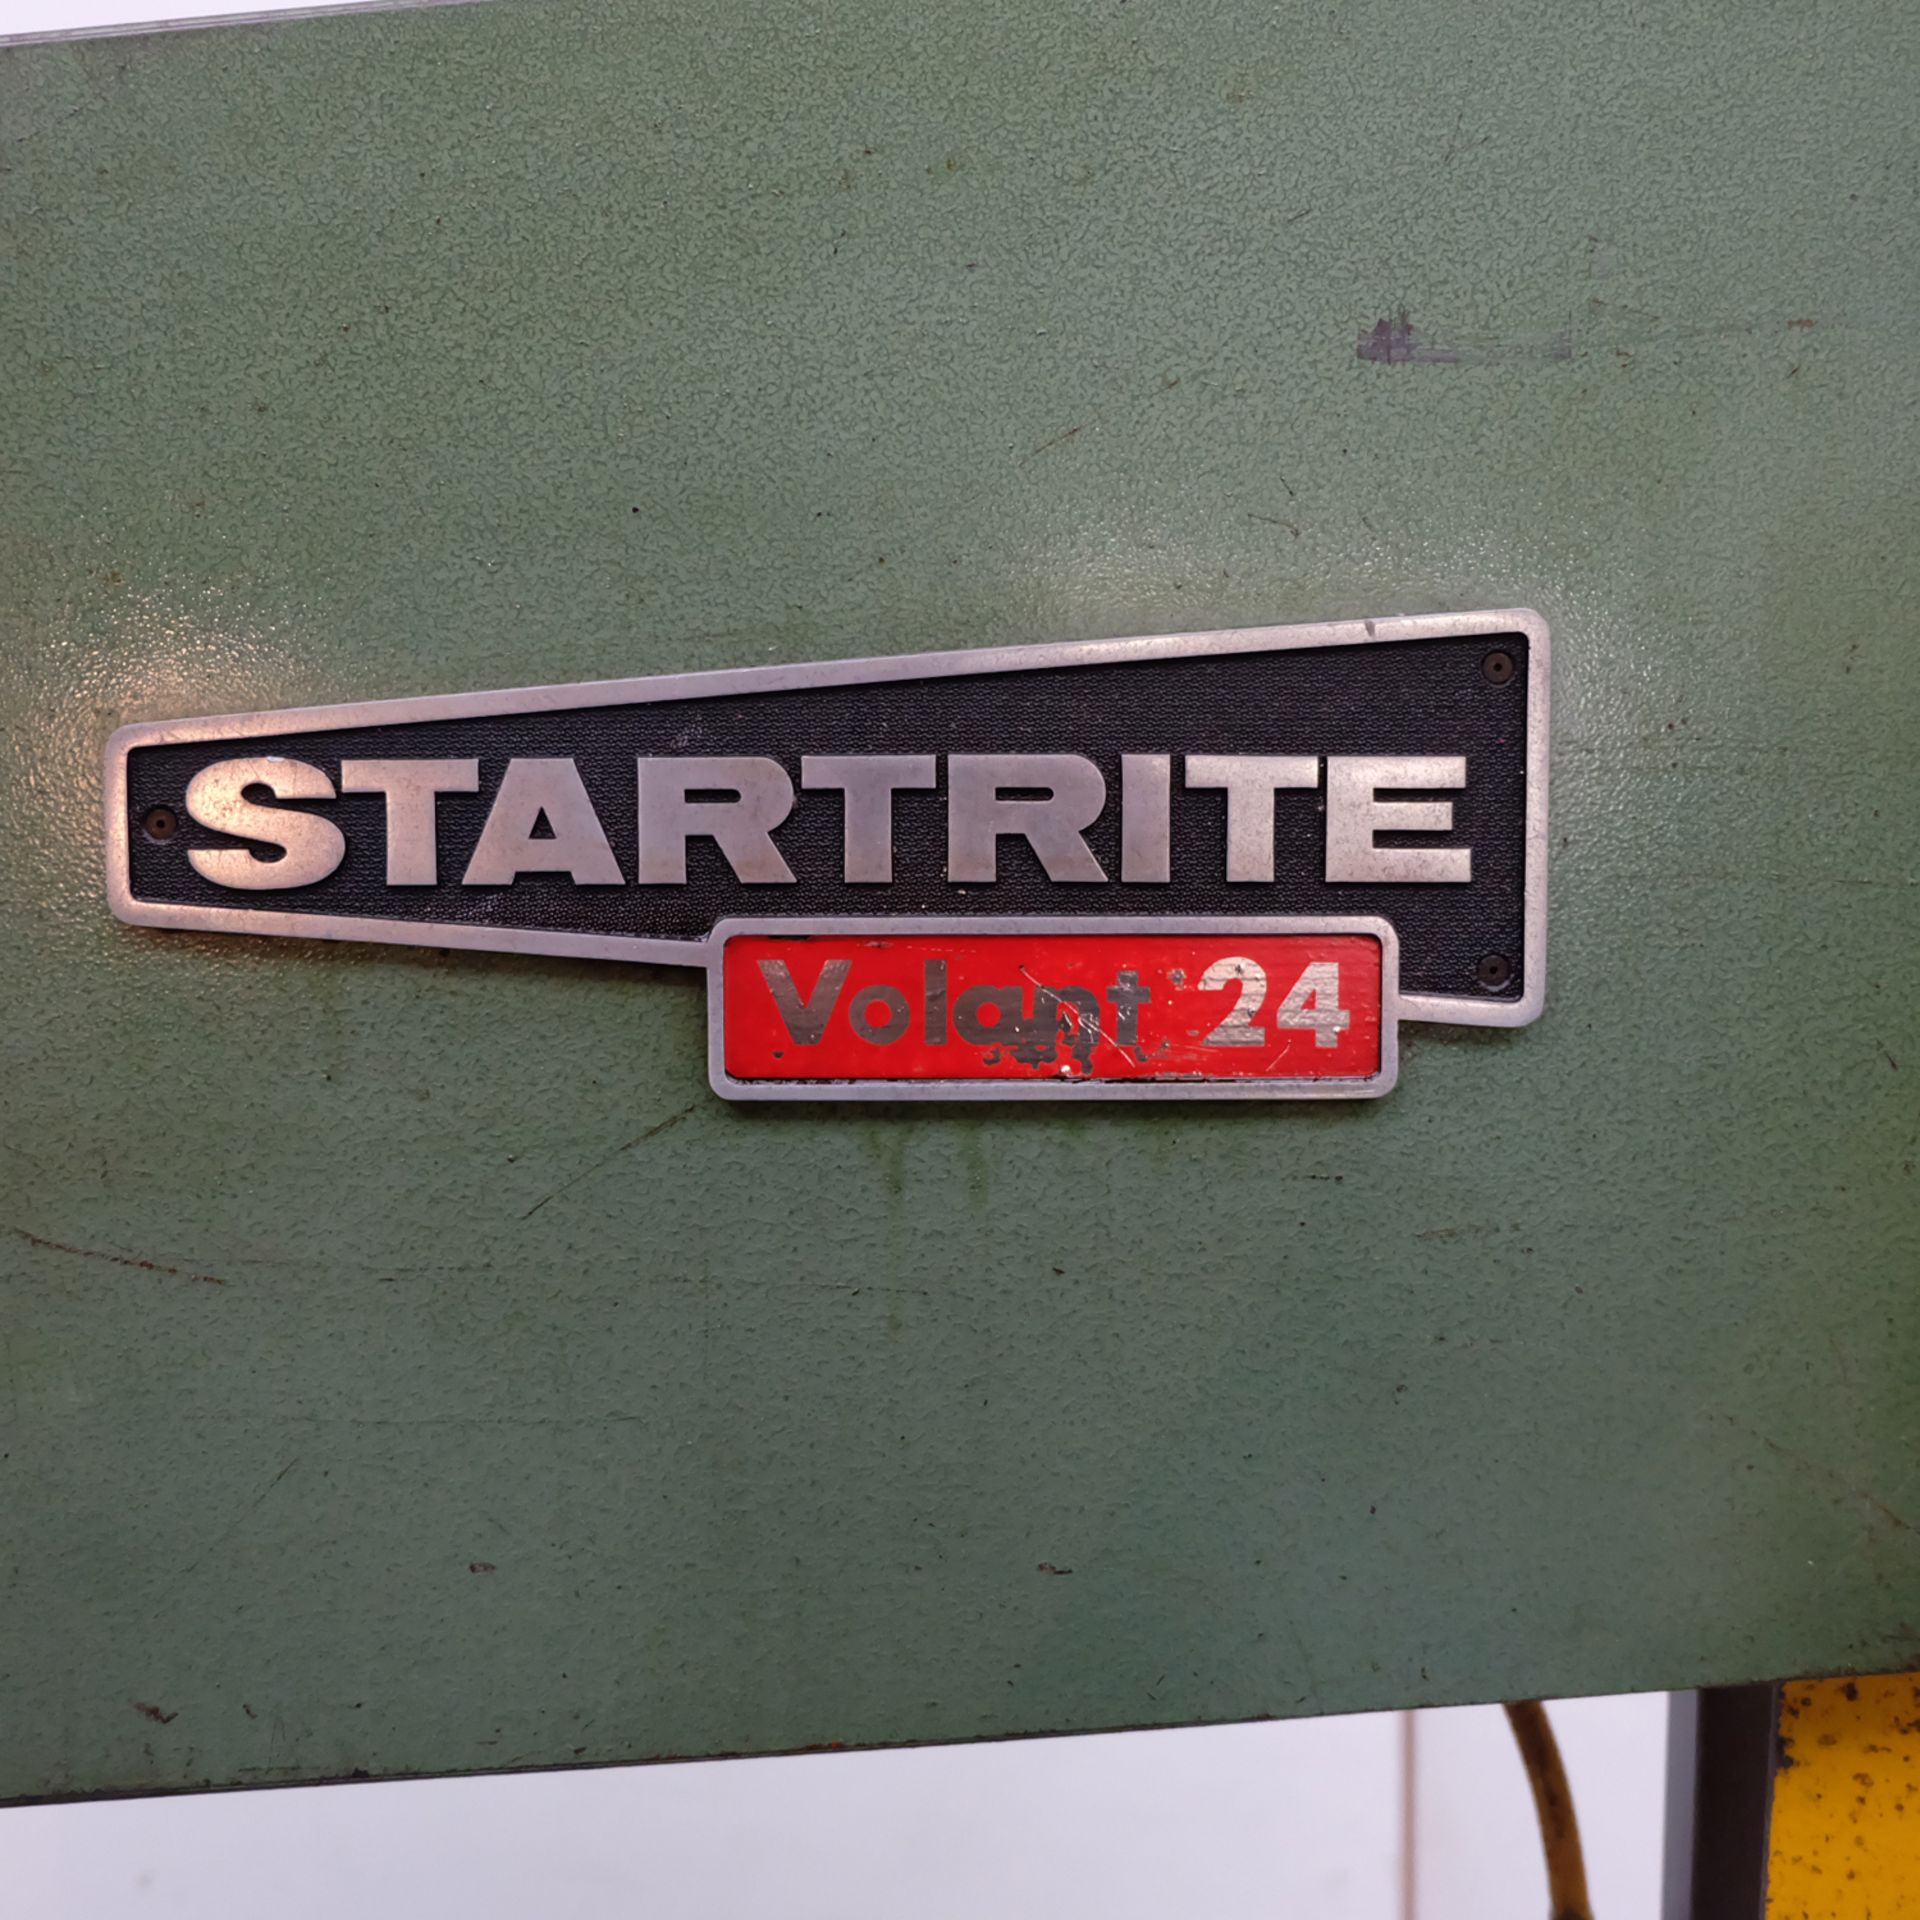 Startrite Volant 24 Type 24-V-10. Vertical Bandsaw. Table Size 19" x 19". Throat 24". - Image 4 of 7